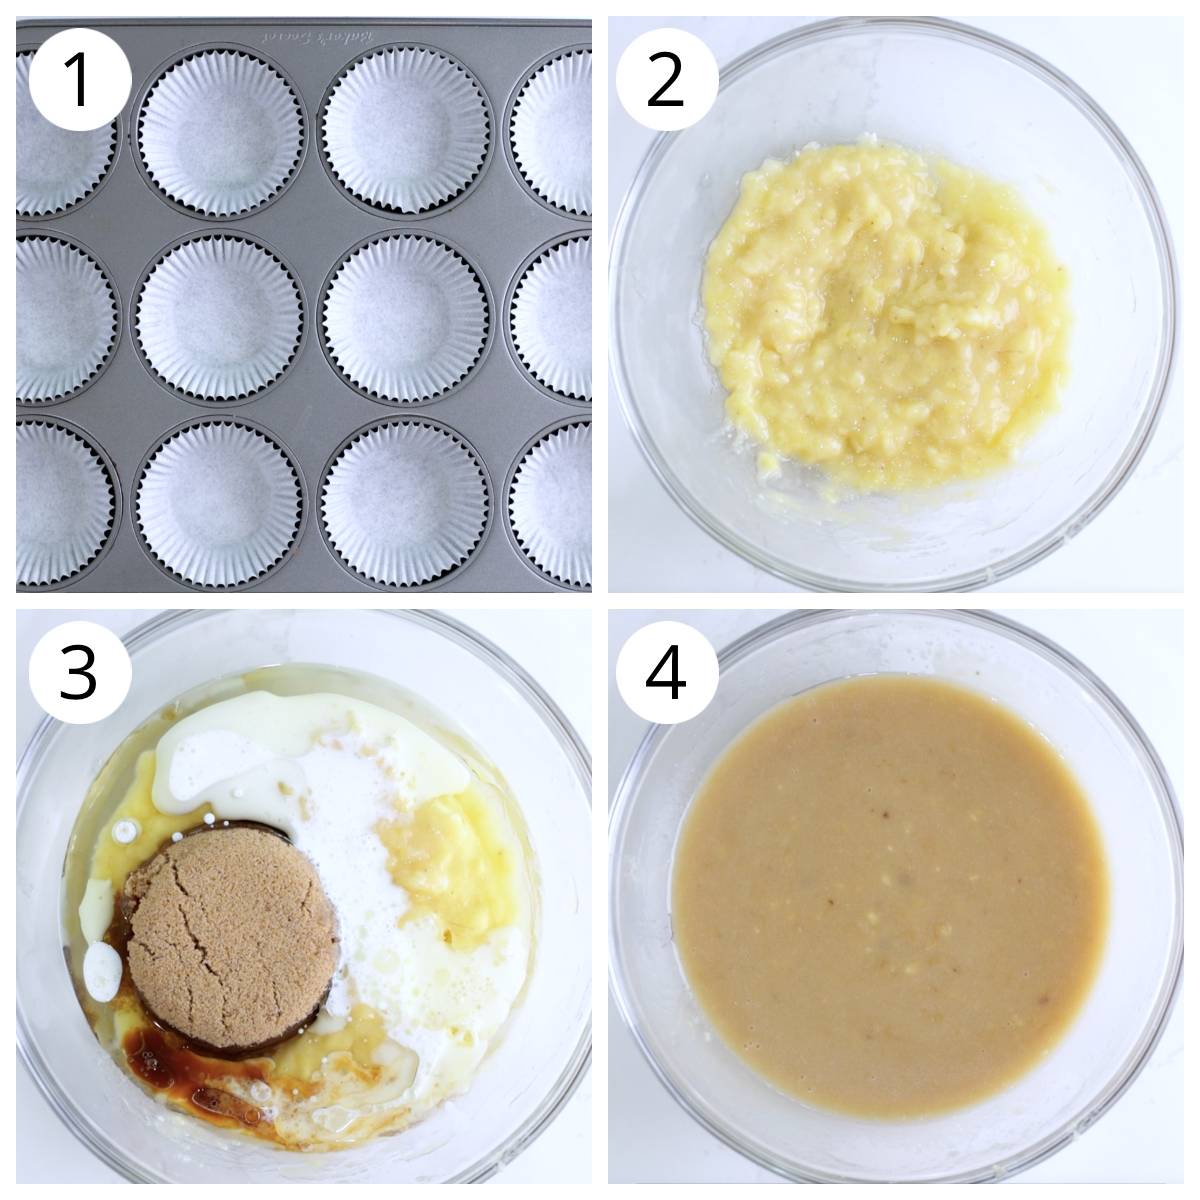 Steps for mixing wet ingredients for banana chocolate chip muffins